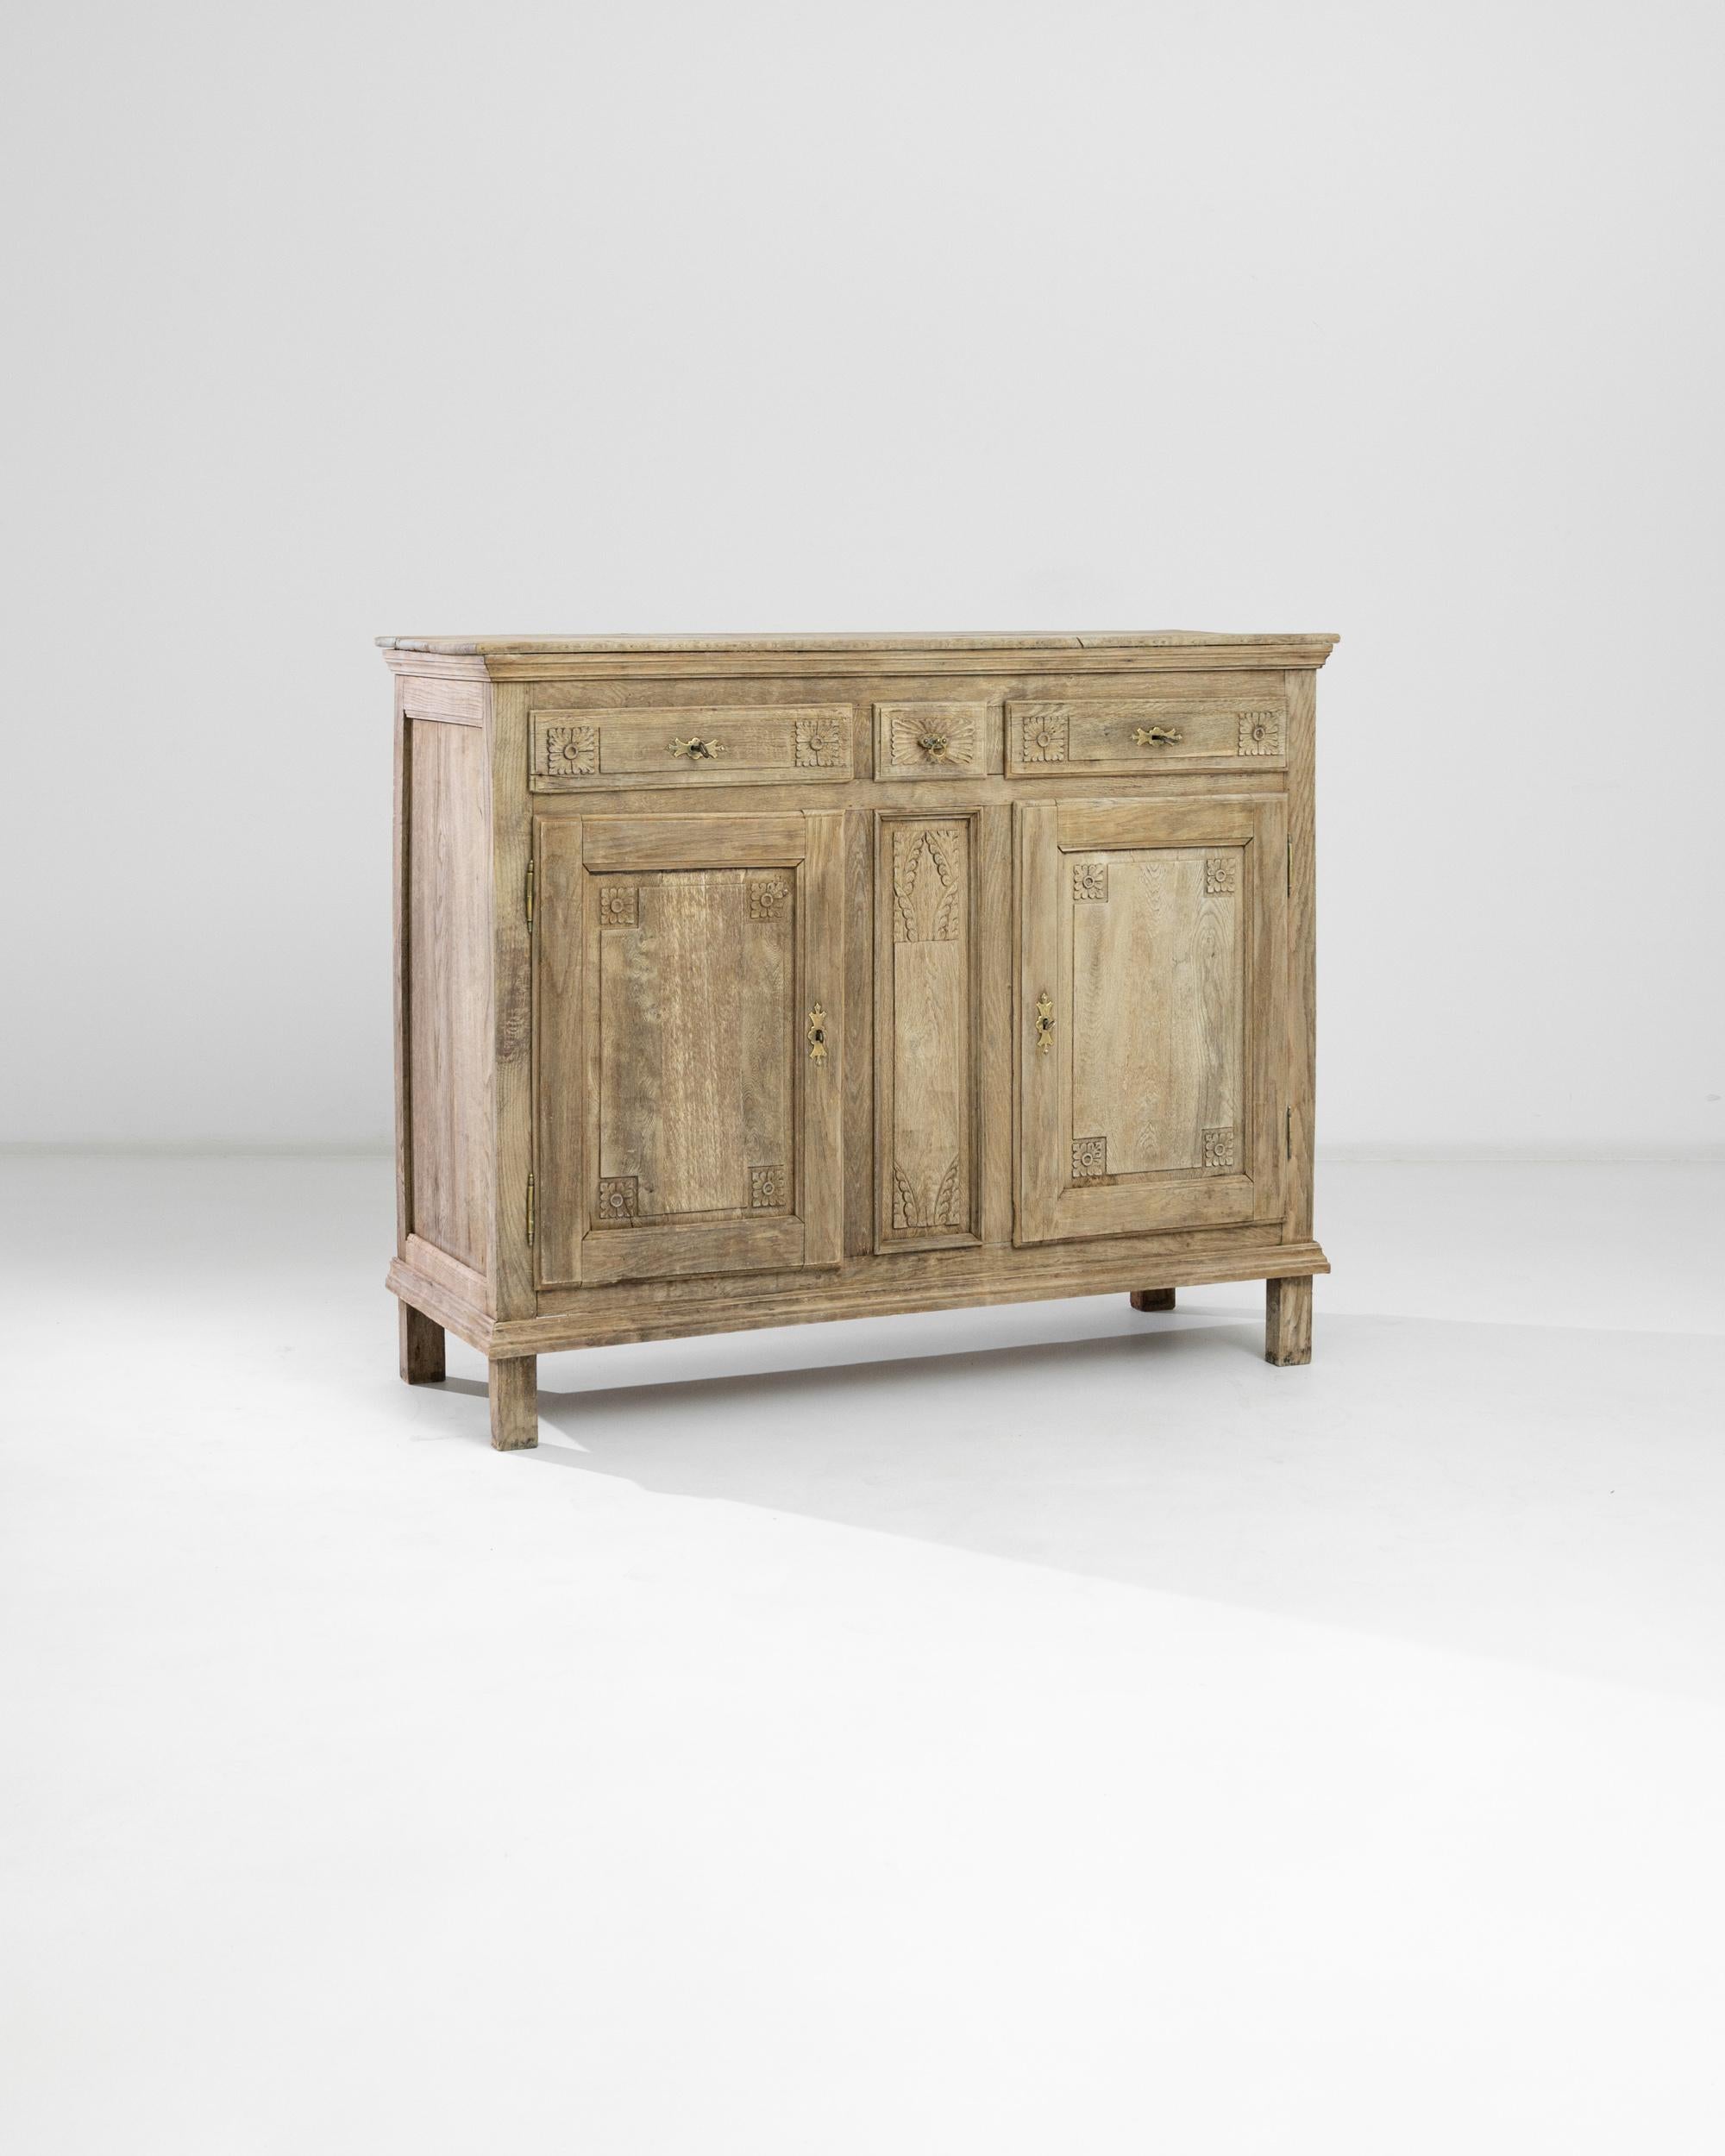 A bleached oak buffet handcrafted in France circa 1860. This vintage chest boasts delicately carved nature-inspired geometrical ornaments that adorn the corners of drawers and panels with exquisite flower and foliage accents. The neoclassical